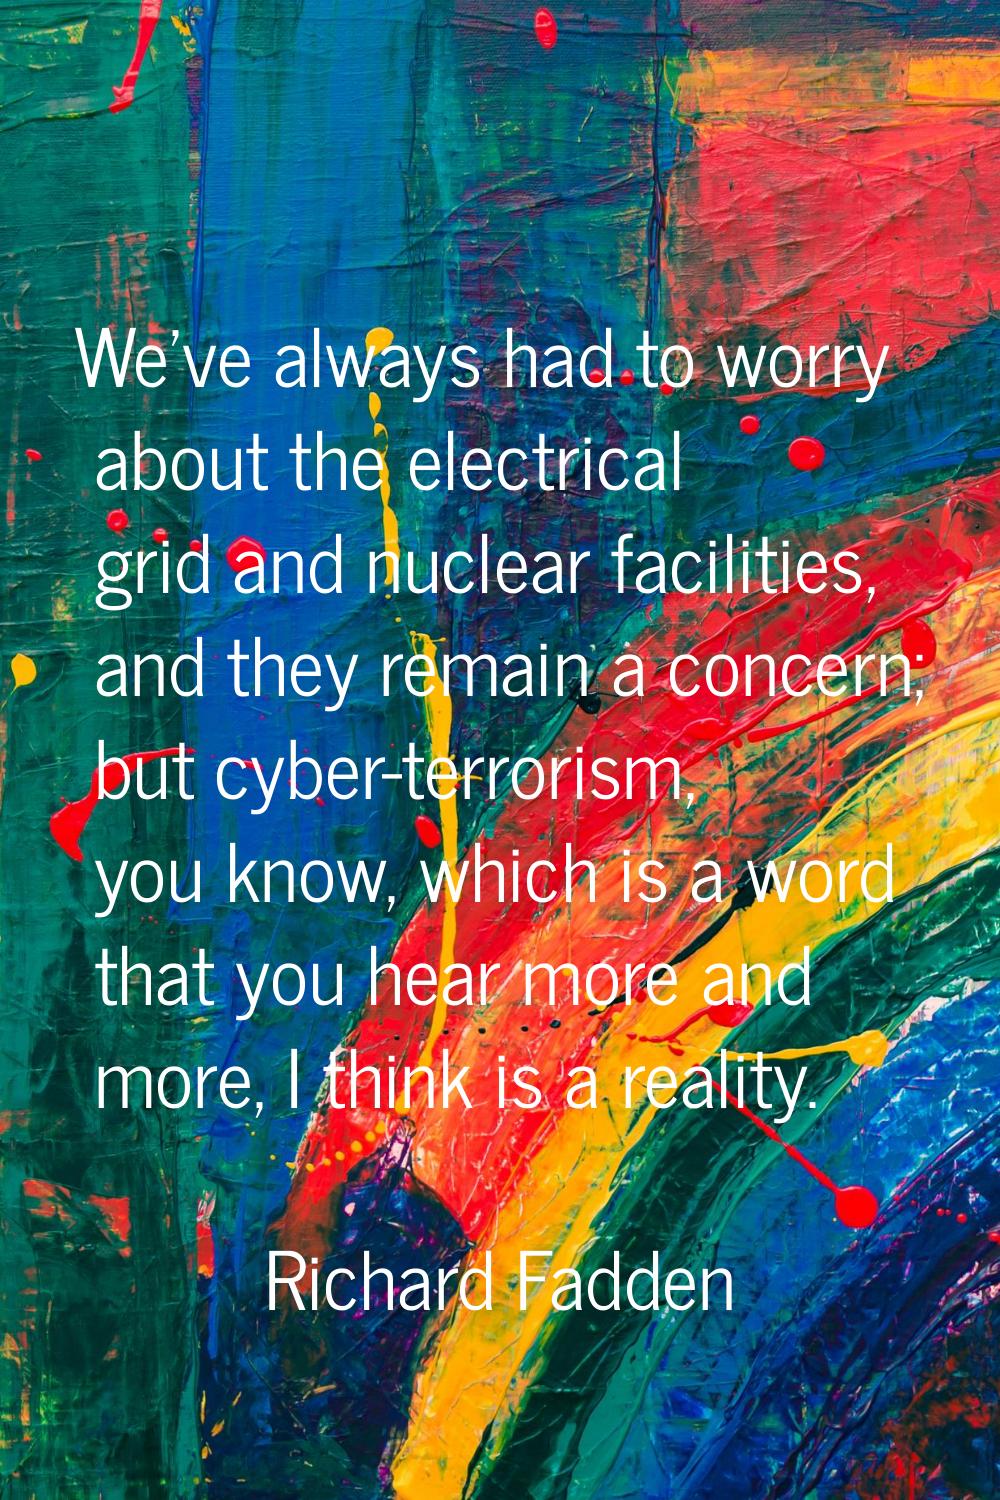 We've always had to worry about the electrical grid and nuclear facilities, and they remain a conce